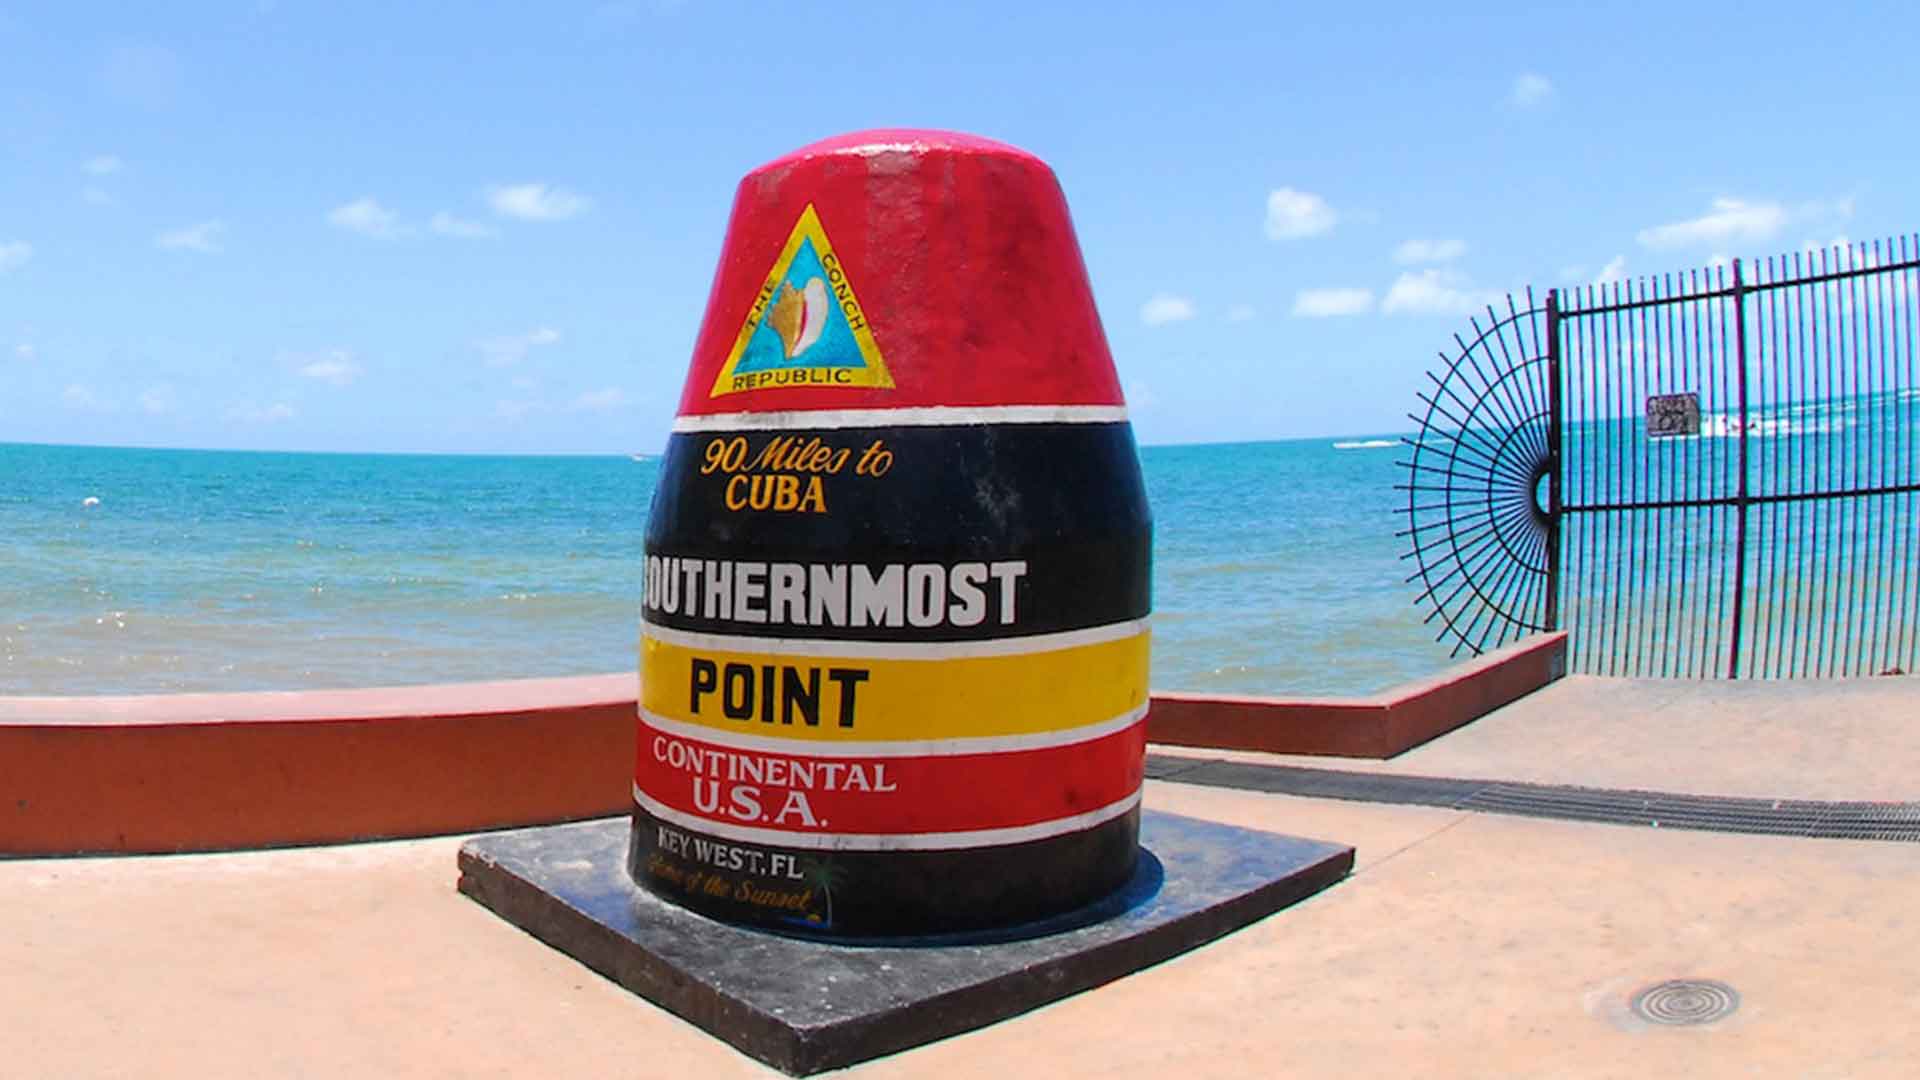 key west southernmost point